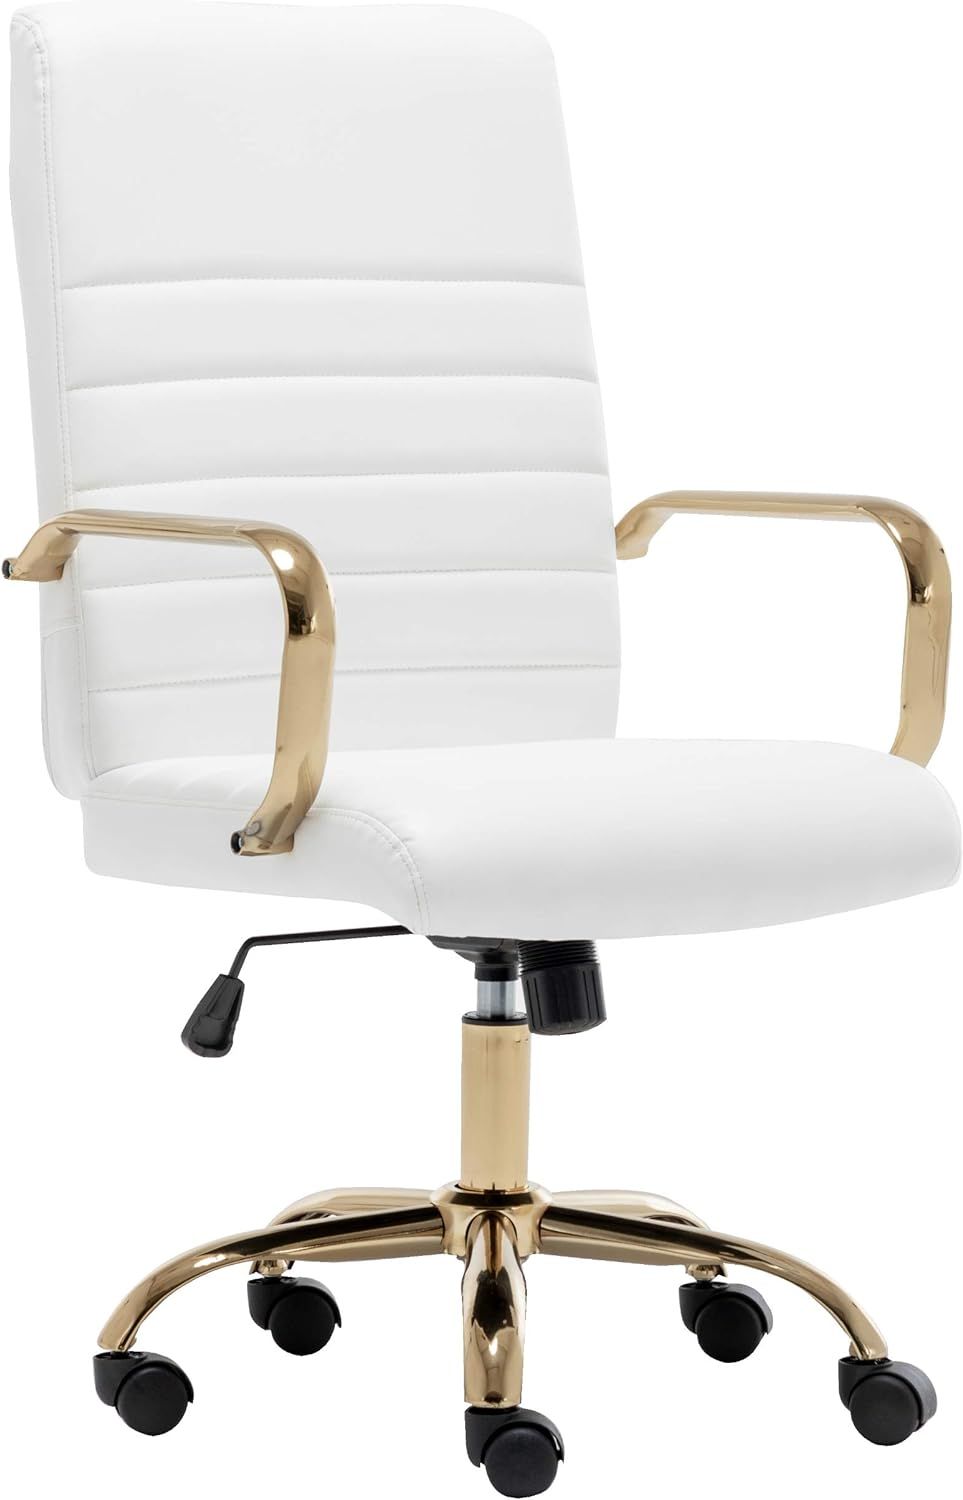 BTEXPERT White Ergonomic Faux Leather Adjustable Home Office Arm Chair Golden Finish | Amazon (US)